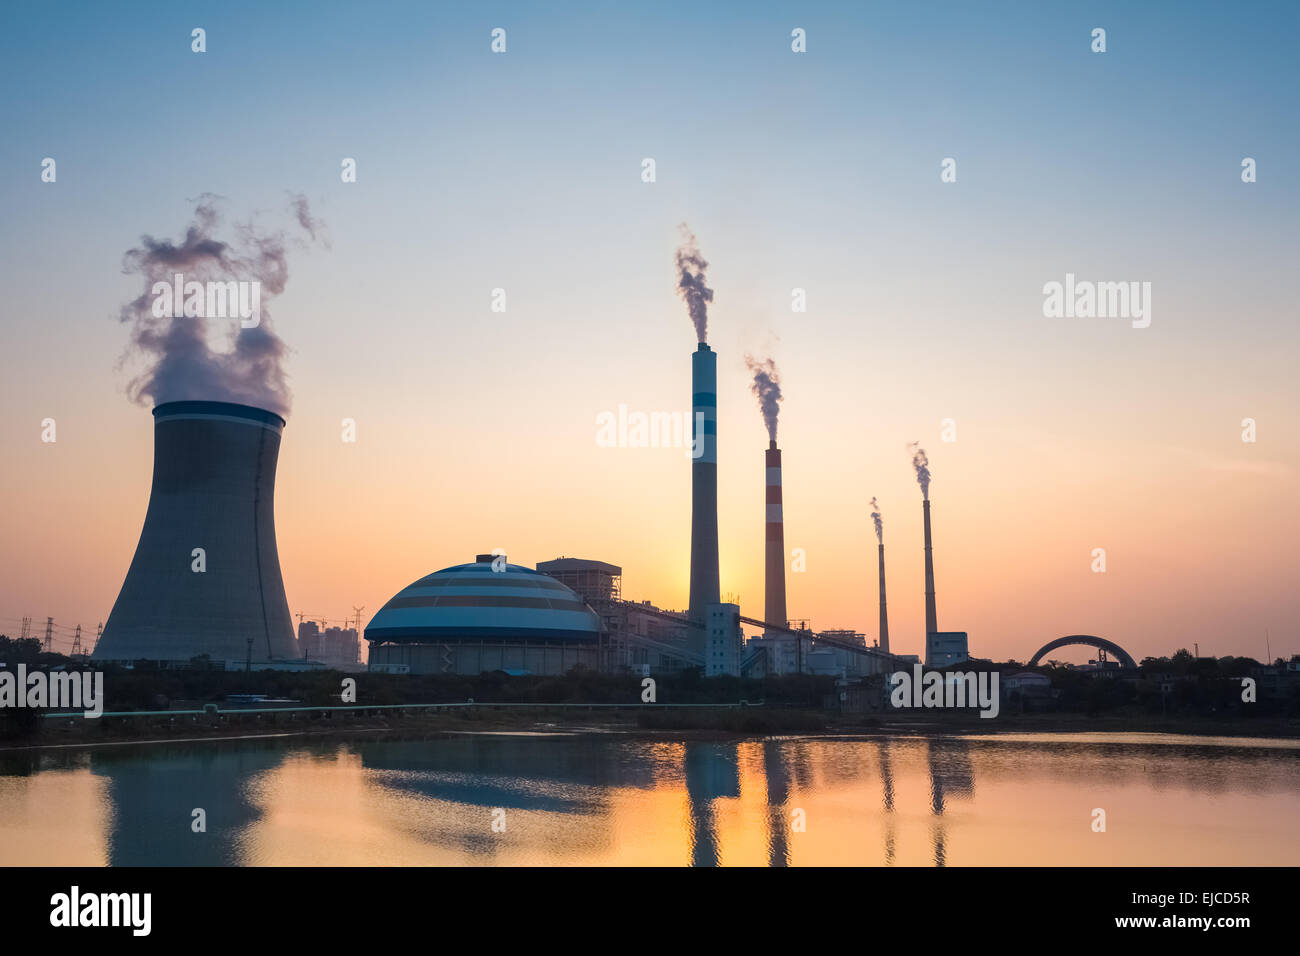 coal power plant in sunset Stock Photo